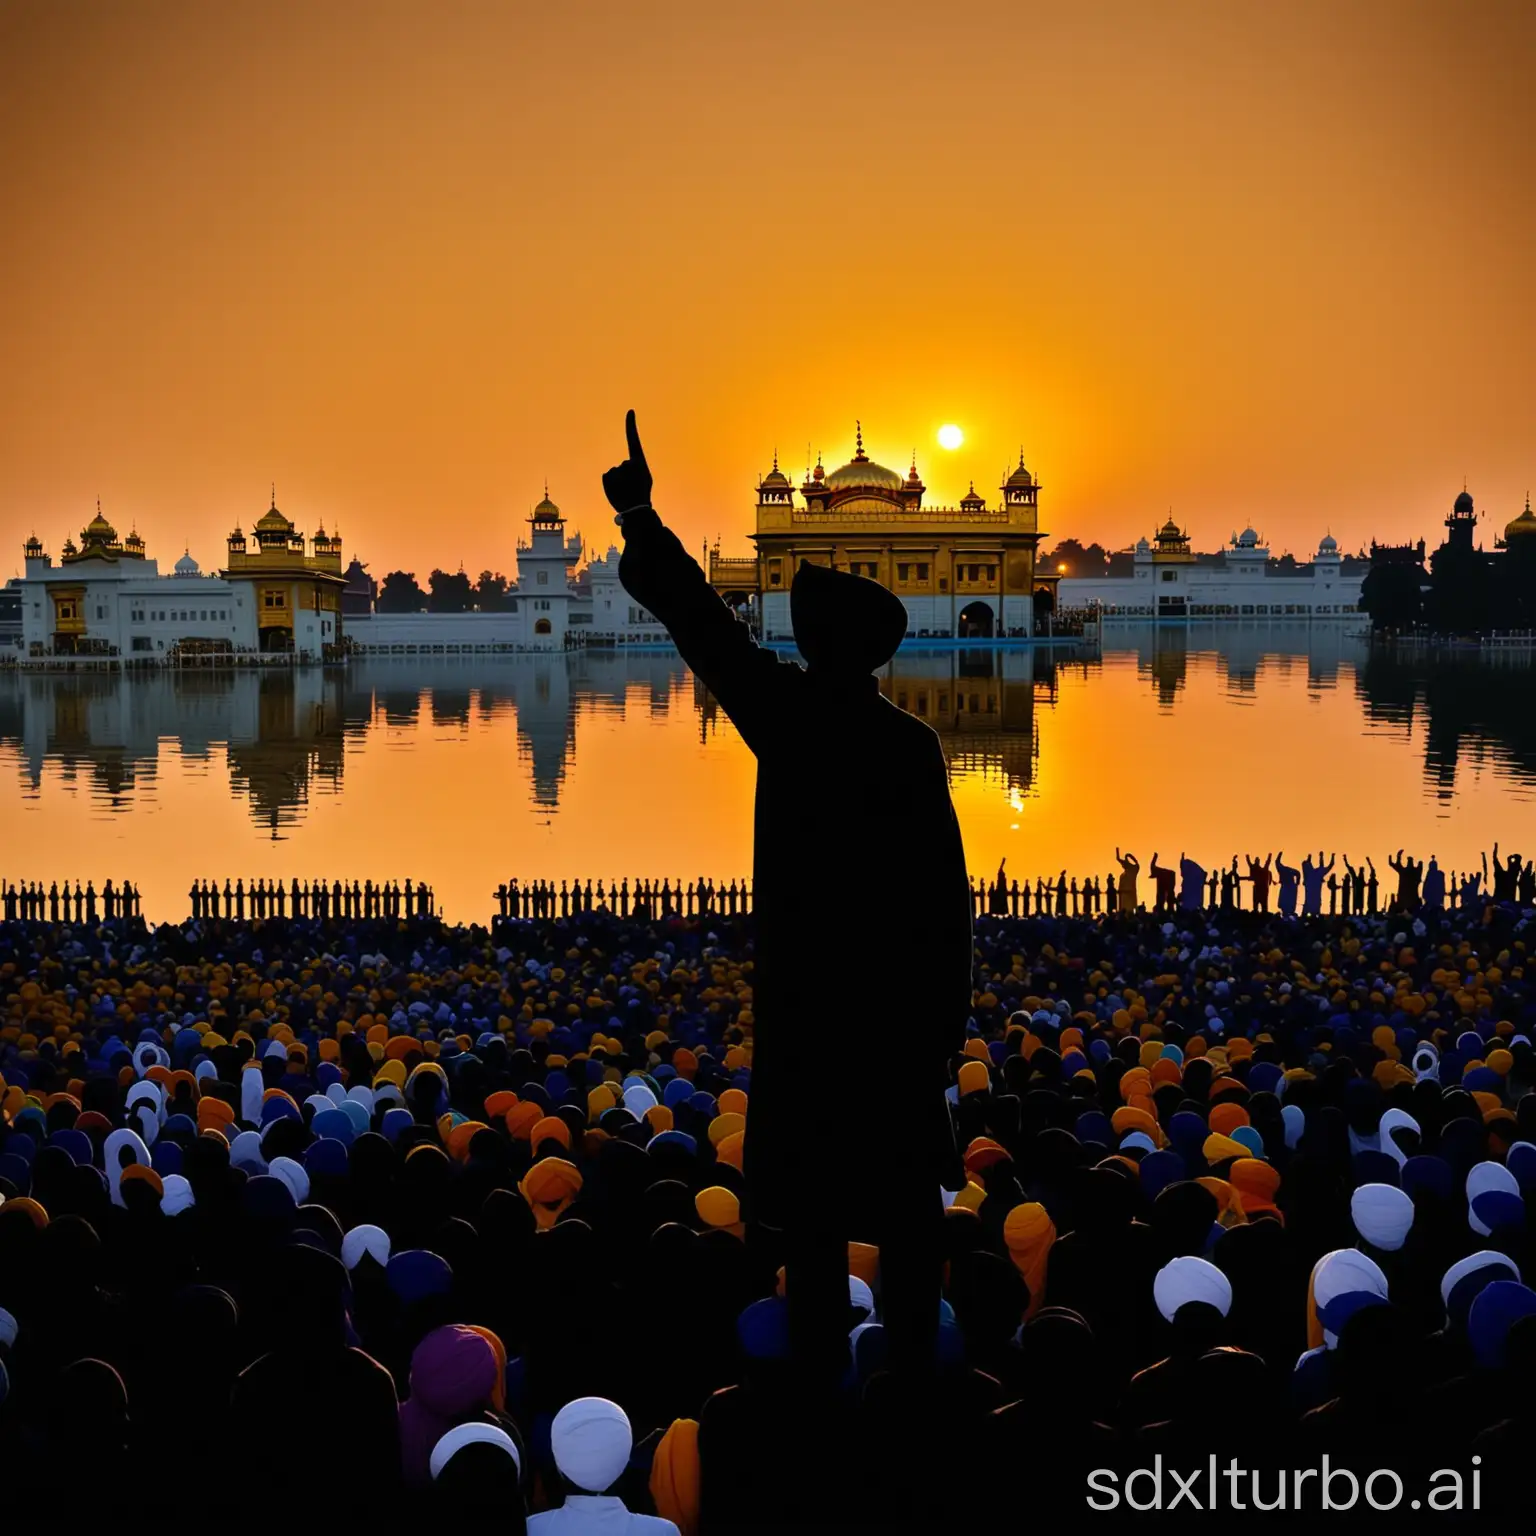 sidhu moosewala silhouette (you cant see the face) figure turned towards the crowd with one finger raised to the sky and the other gripping the mic, infront of crowds of sikhs (also silhoutte) at the golden temple at dawn